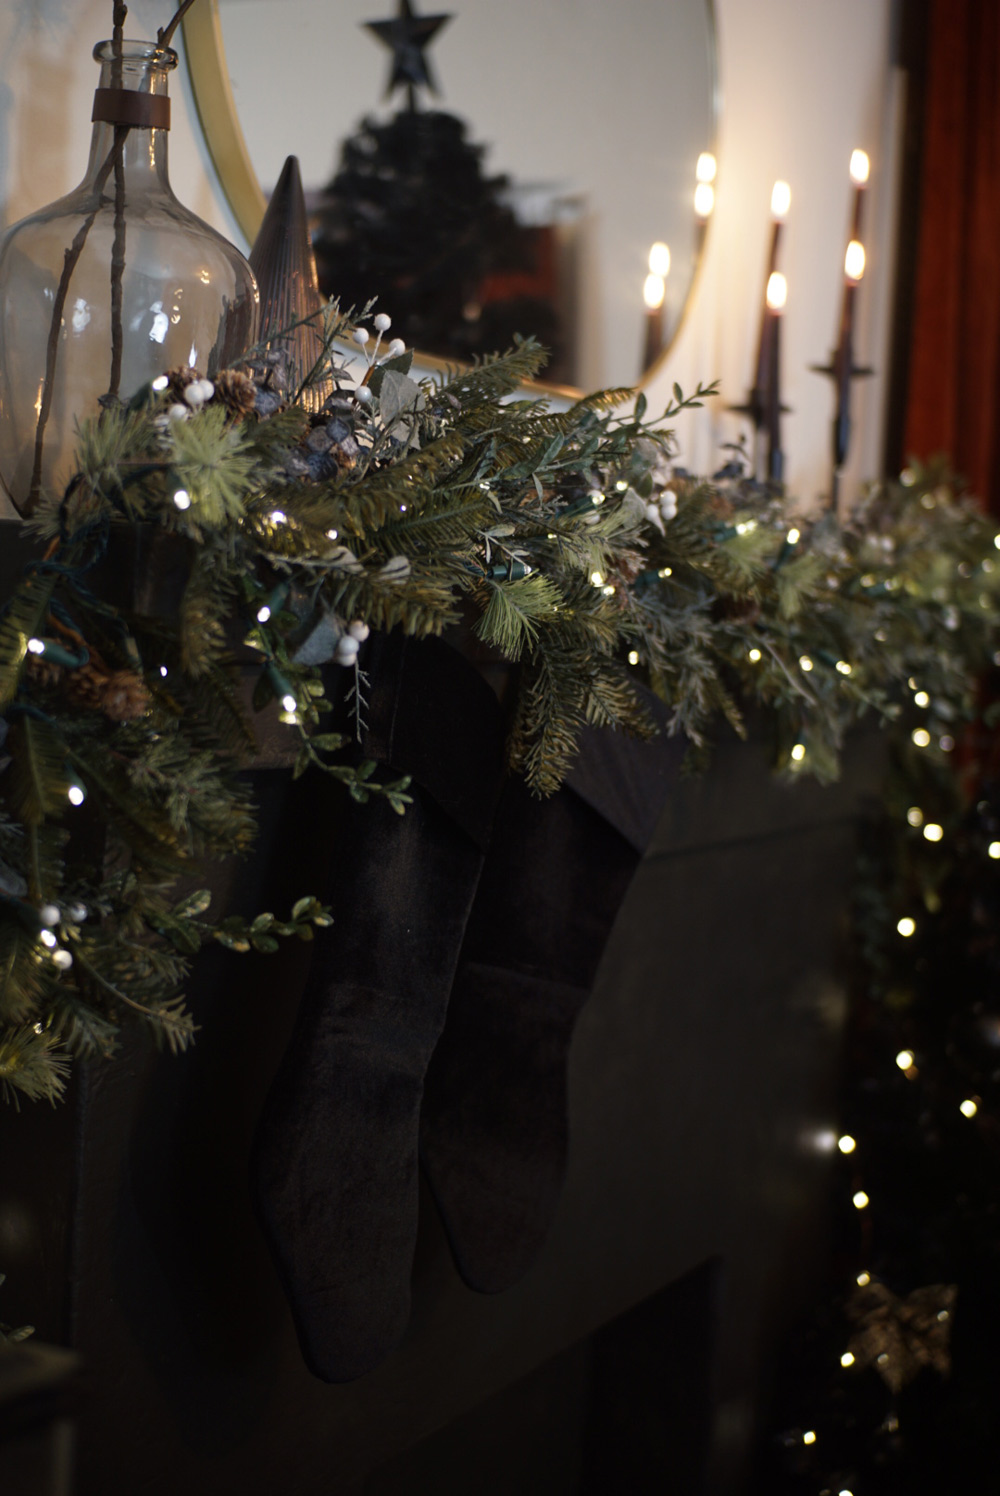 A black mantel area decorated with garland, black stockings, and candles.